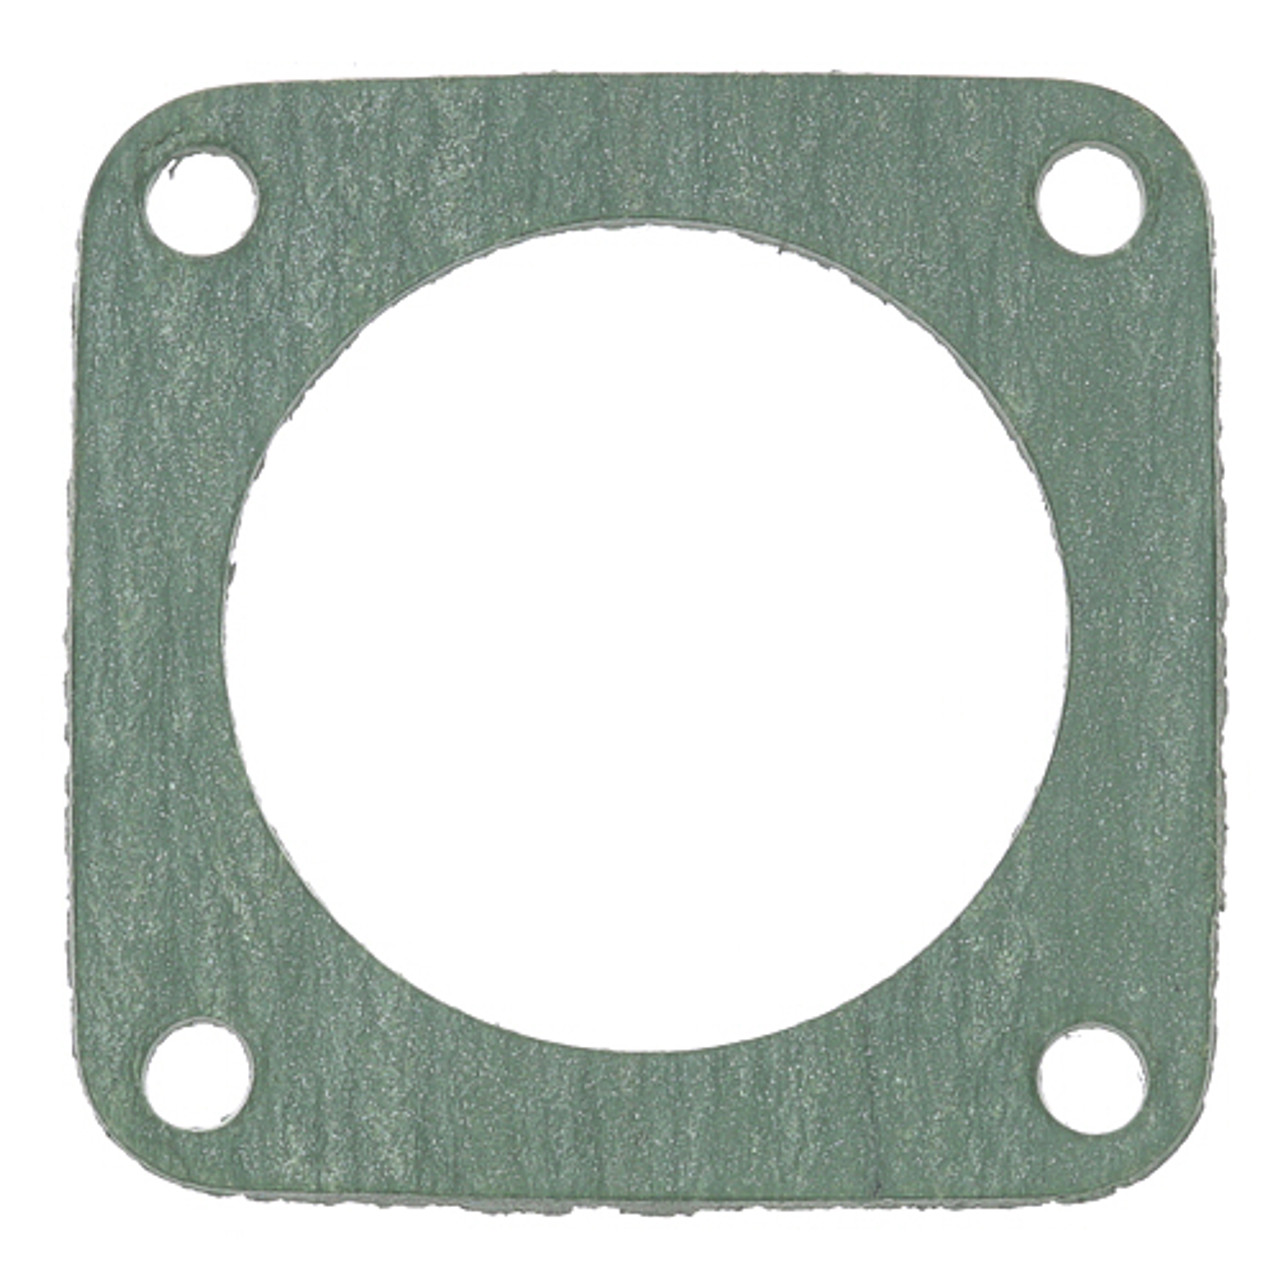 L W C O Gasket 3-1/16" X 3-1/16" - Replacement Part For Market Forge S10-5209